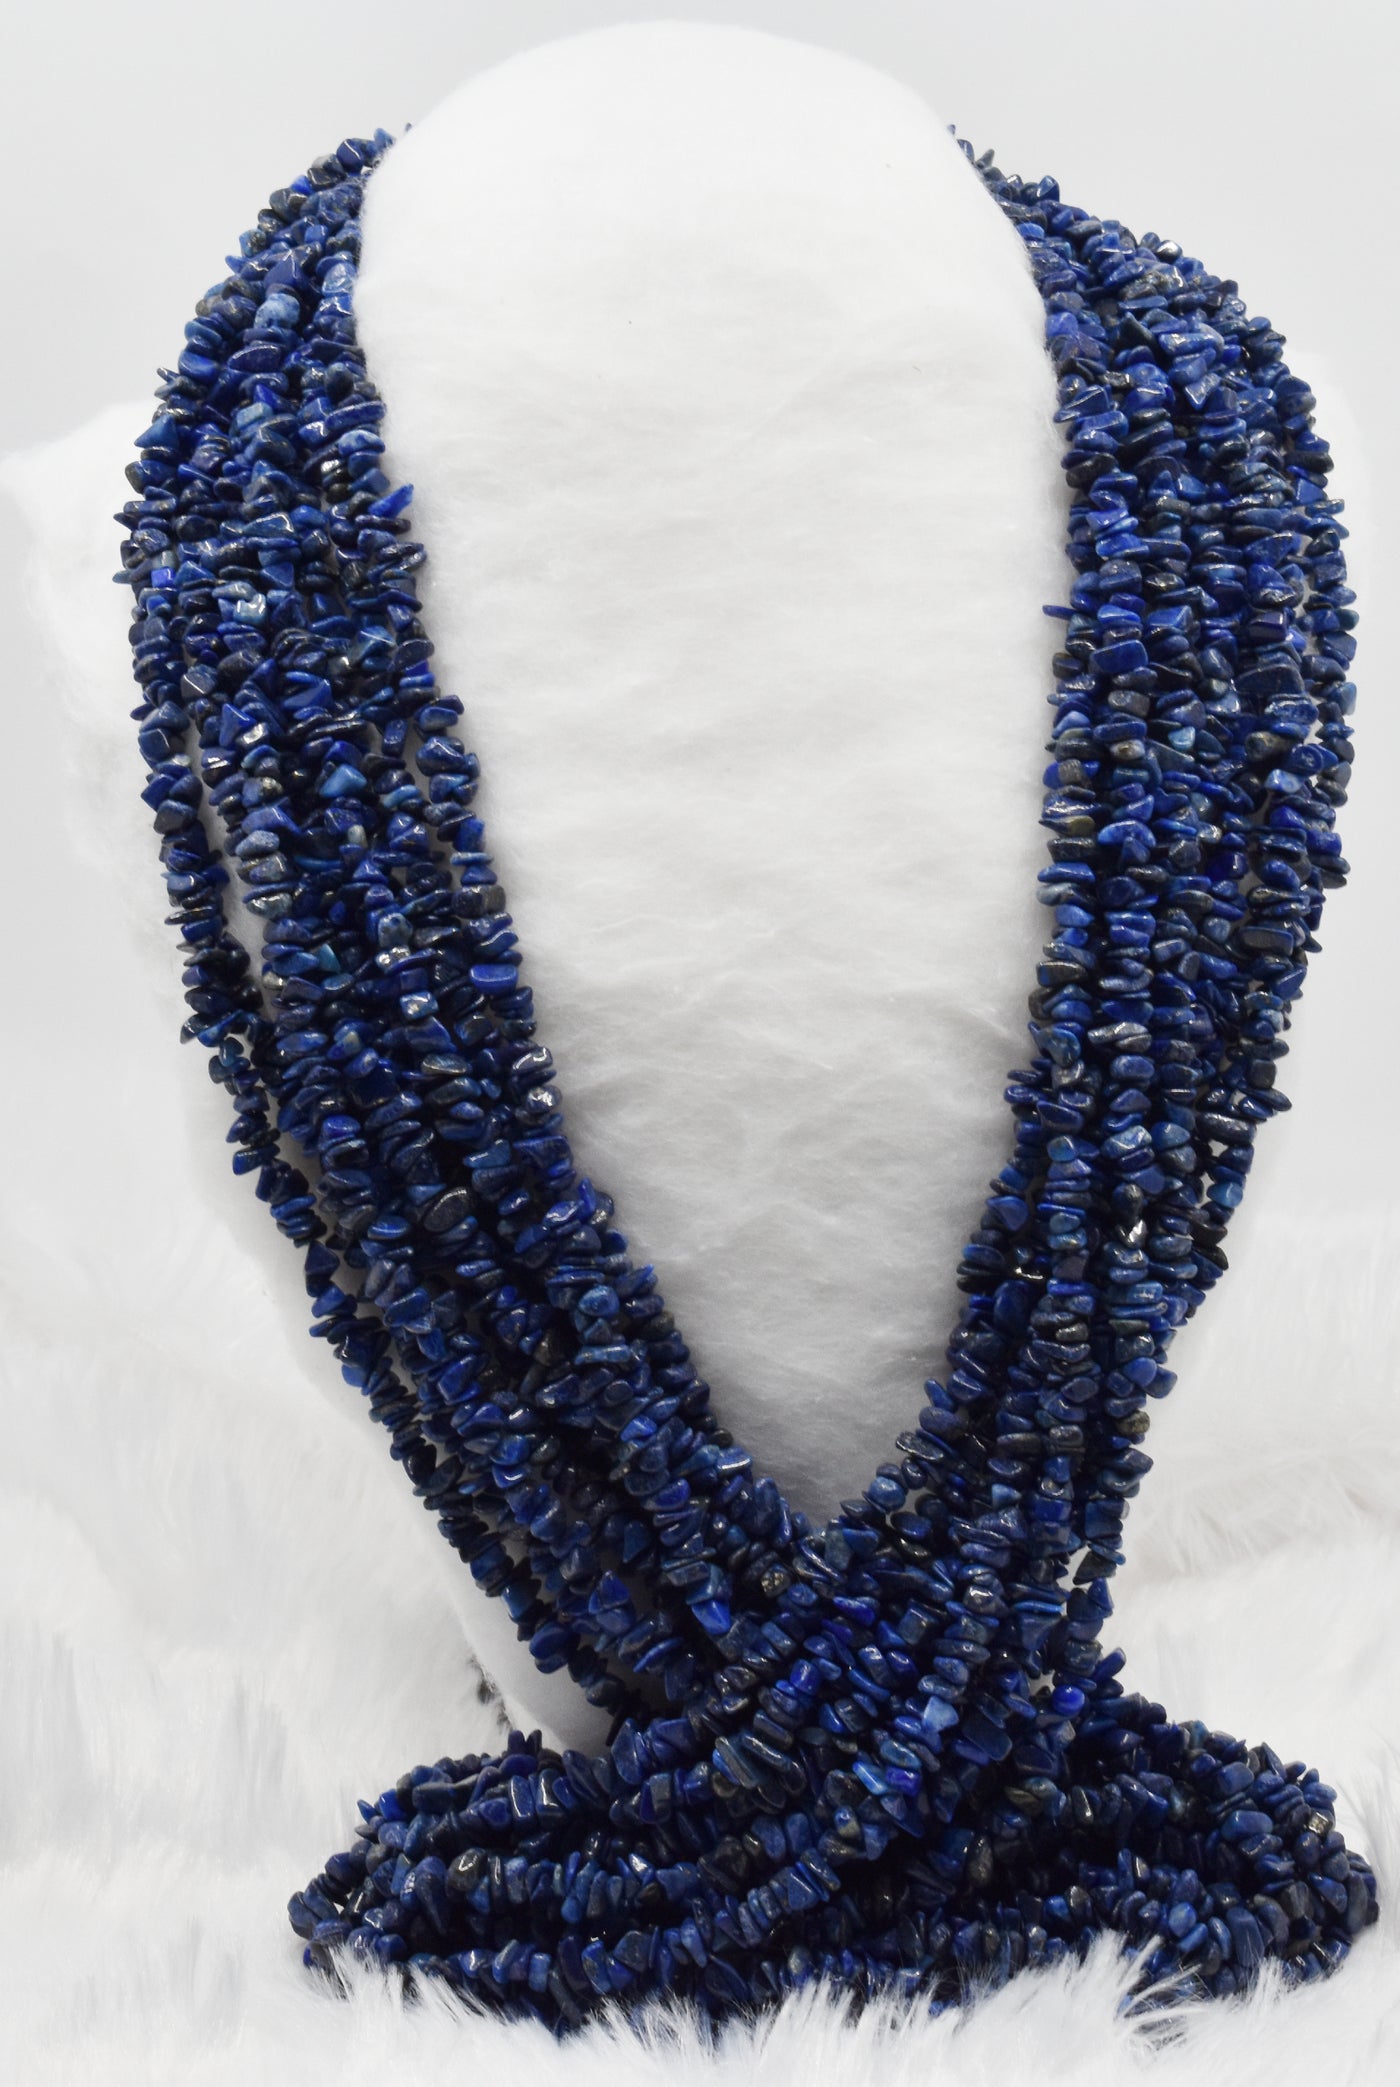 Uncut Raw Lapis Lazuli Crystal Chip Beads for Necklace (Expansion and Insight)